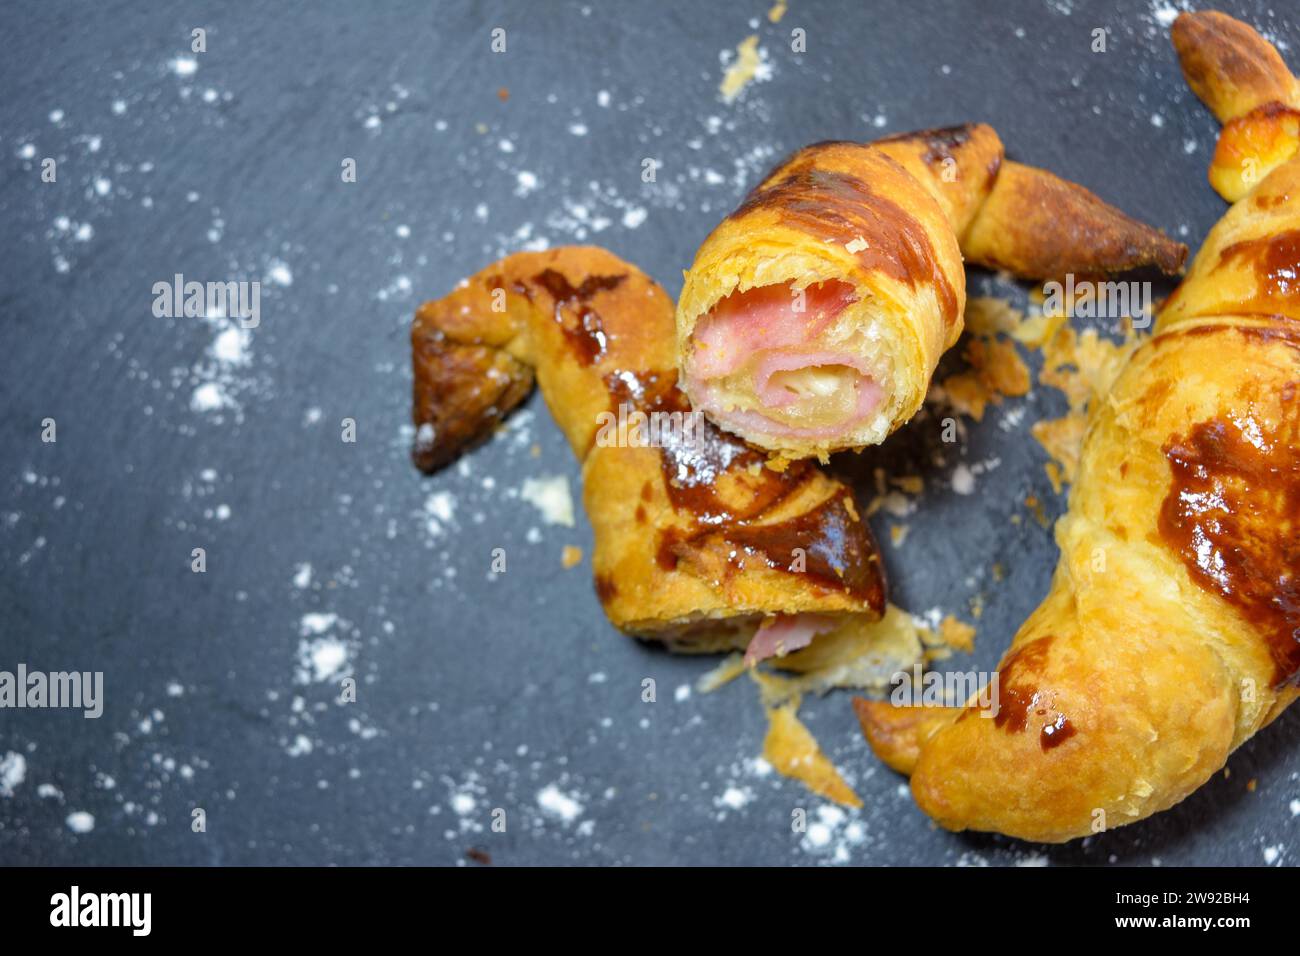 Sliced baked pastry with ham and cheese on a dark background, dusted with a powdery substance, homemade croissant stuffed and cut in half Stock Photo